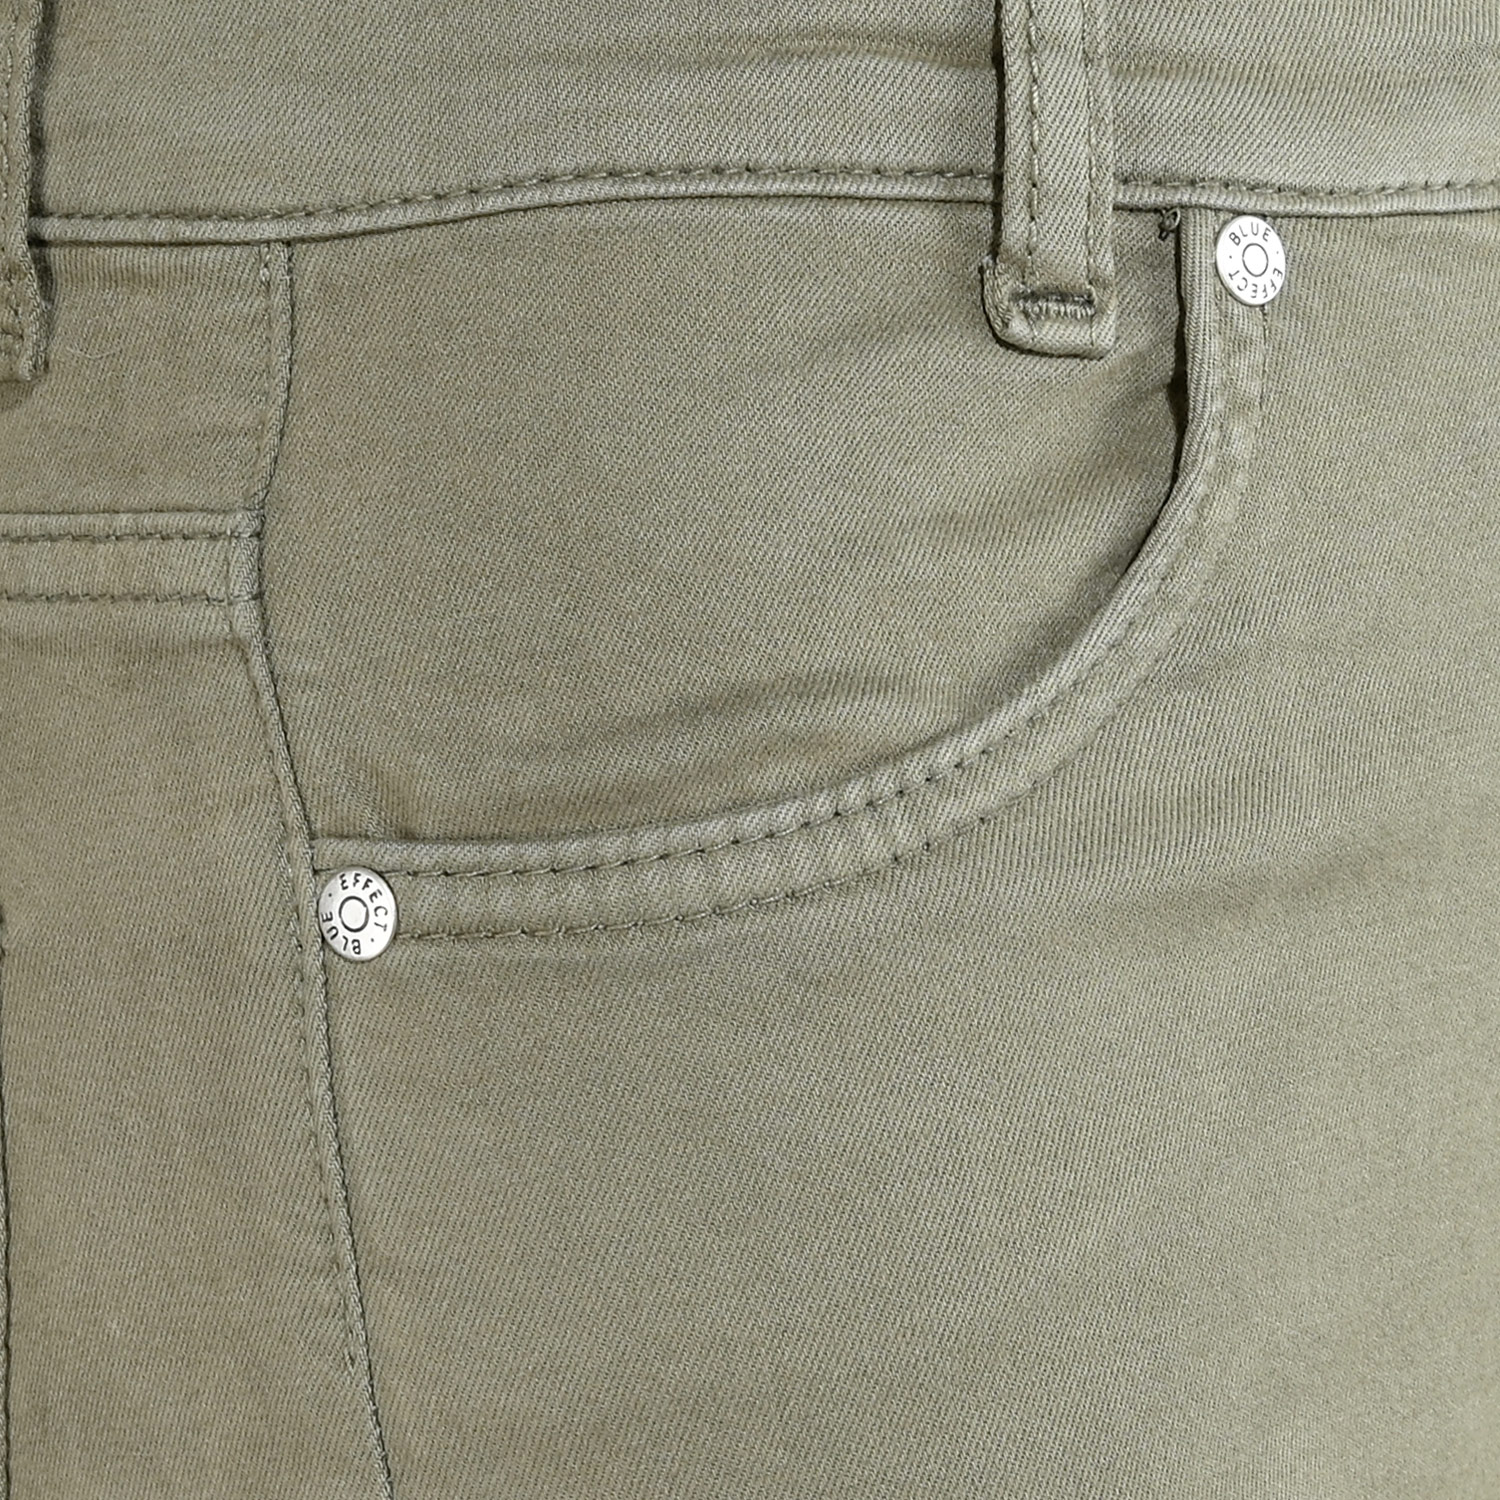 1367-Girls Super Wide Leg Pant Cargo, available in Normal